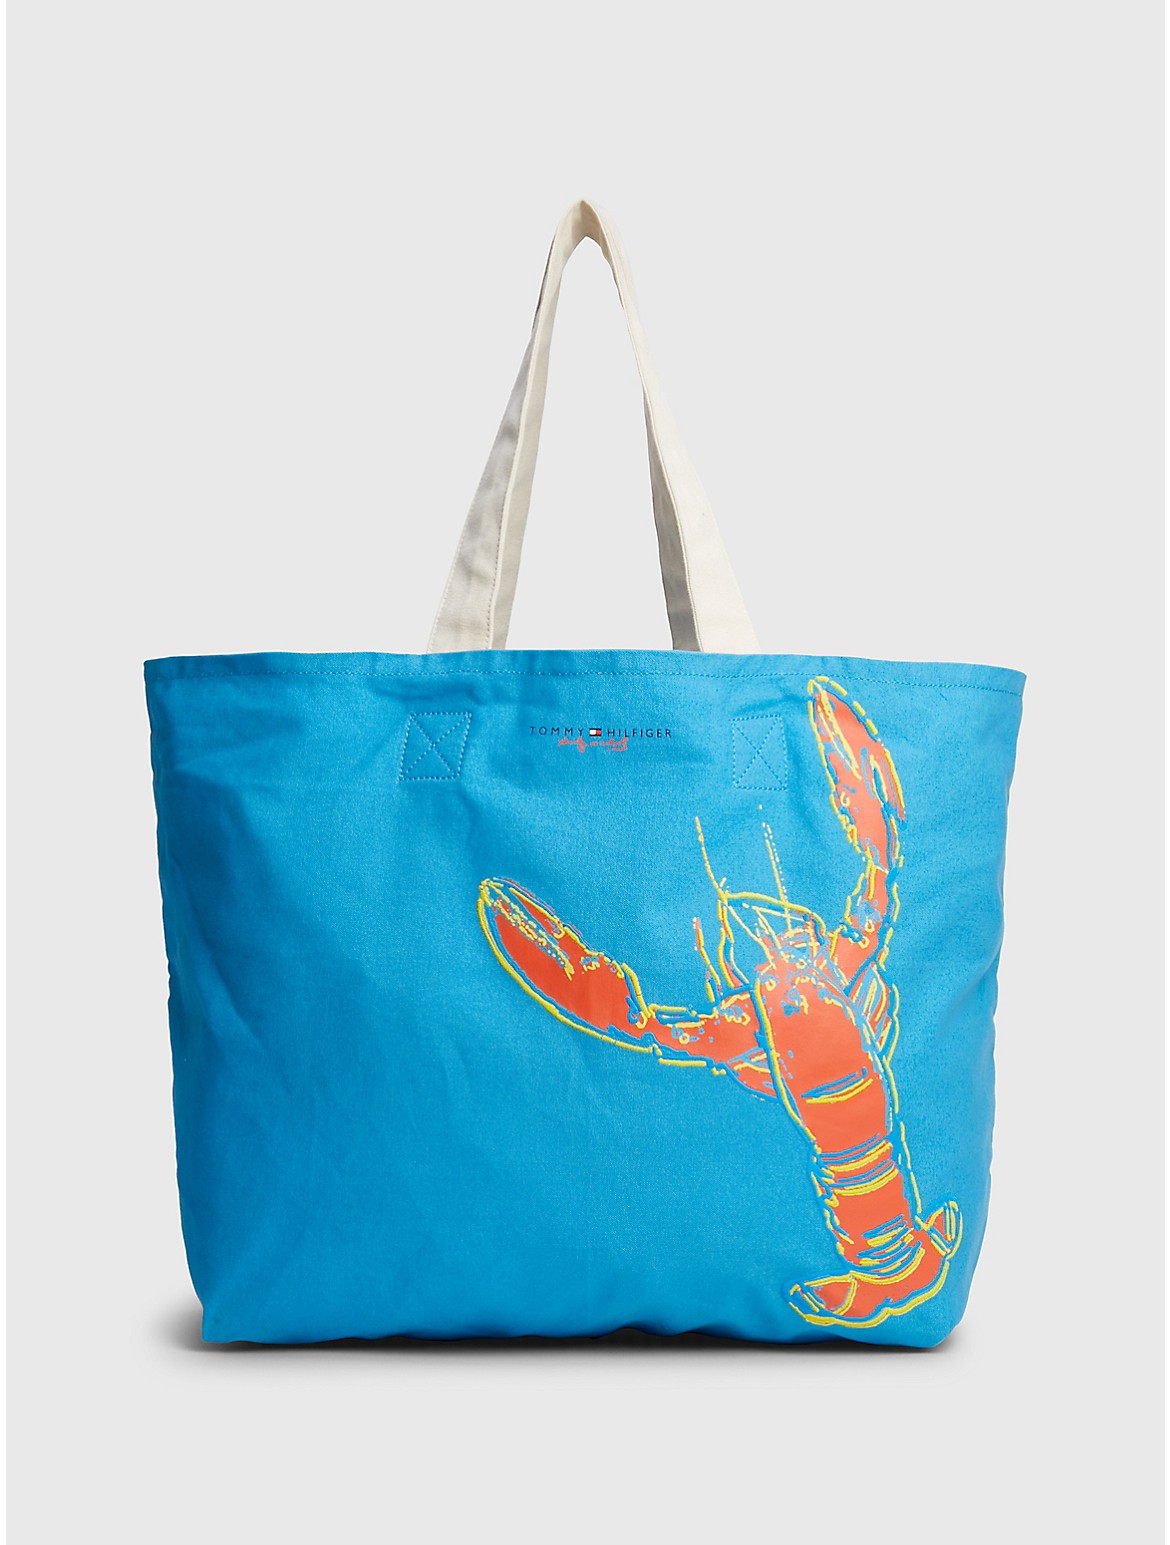 Tommy Hilfiger Men's TH X ANDY WARHOL Tote - Blue